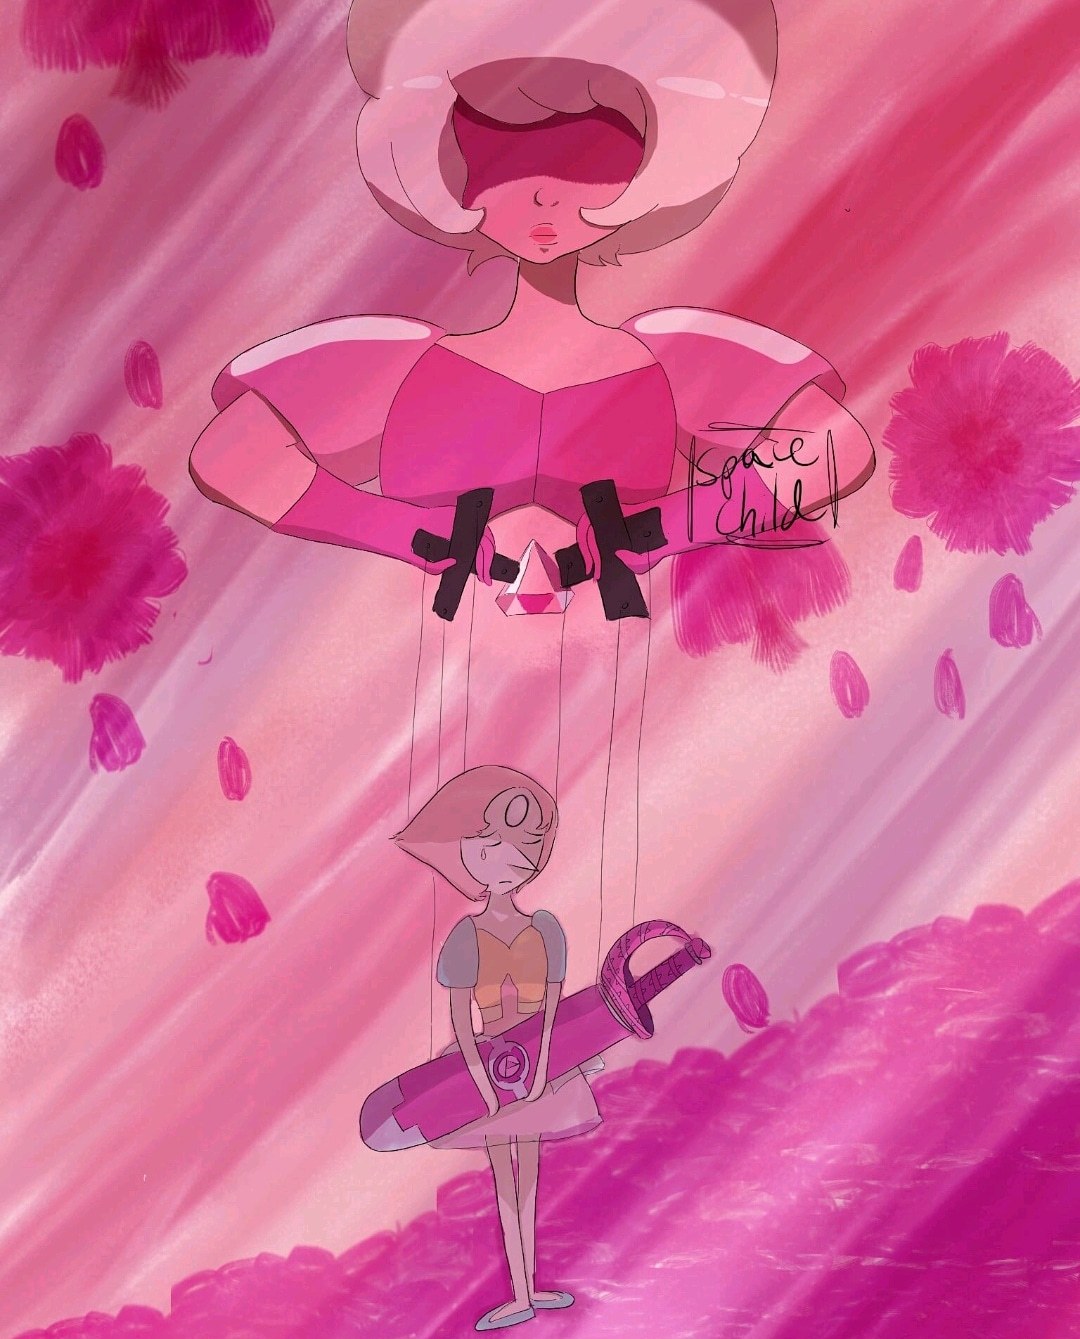 Maybe little late for single pale rose art, but whatever